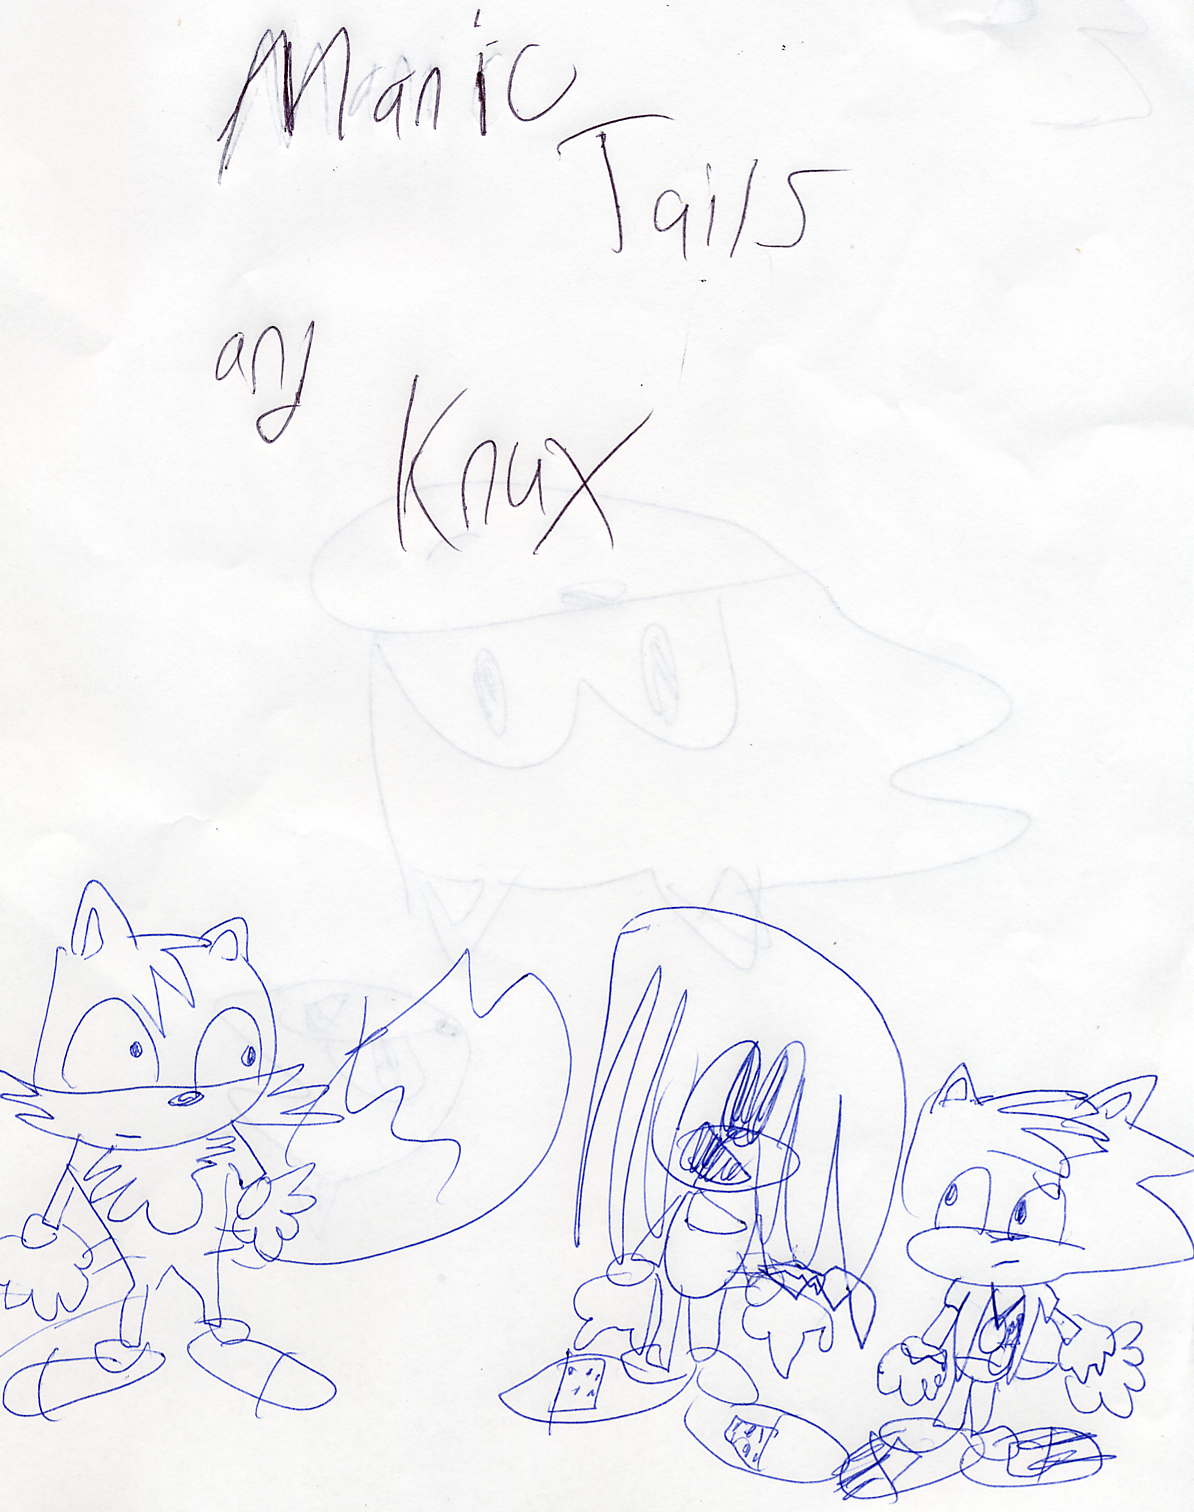 Manic, Tails, and my style of knux (for Man1c) by Kacheek